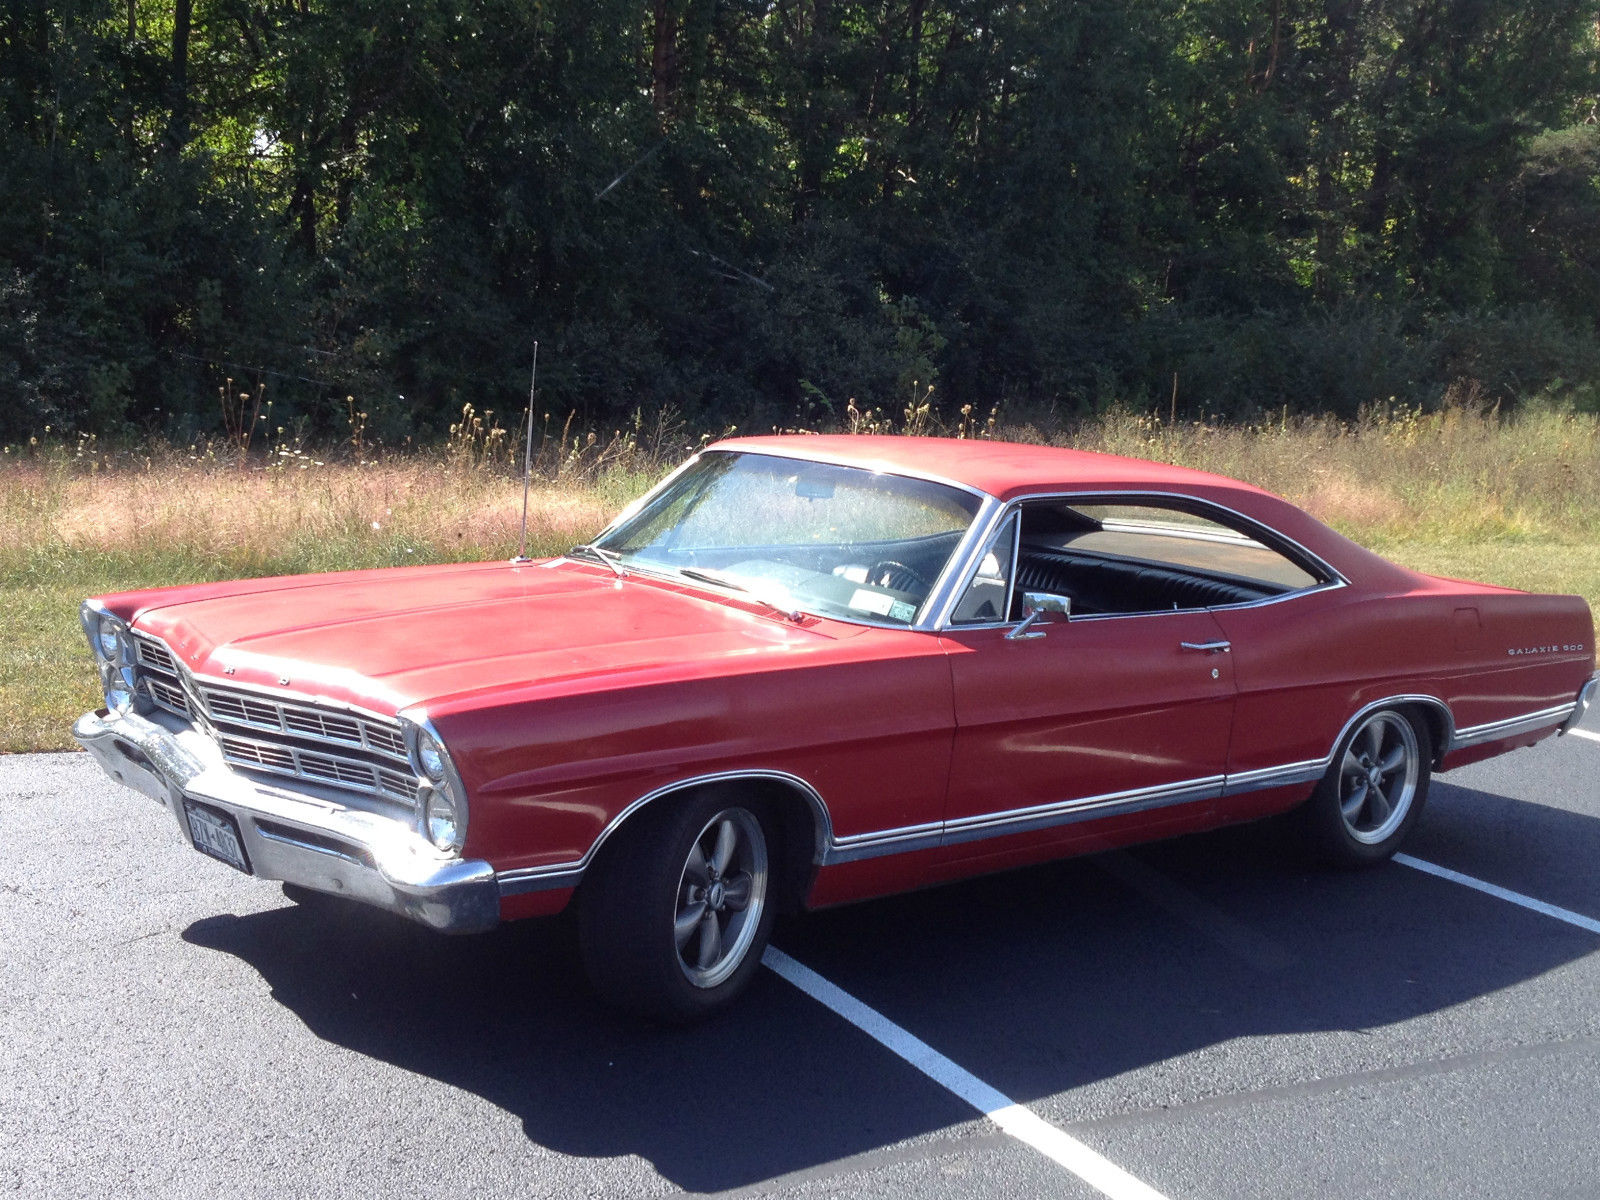 Ford Galaxie Door Fastback Survivor V Classic Ford Galaxie For Sale